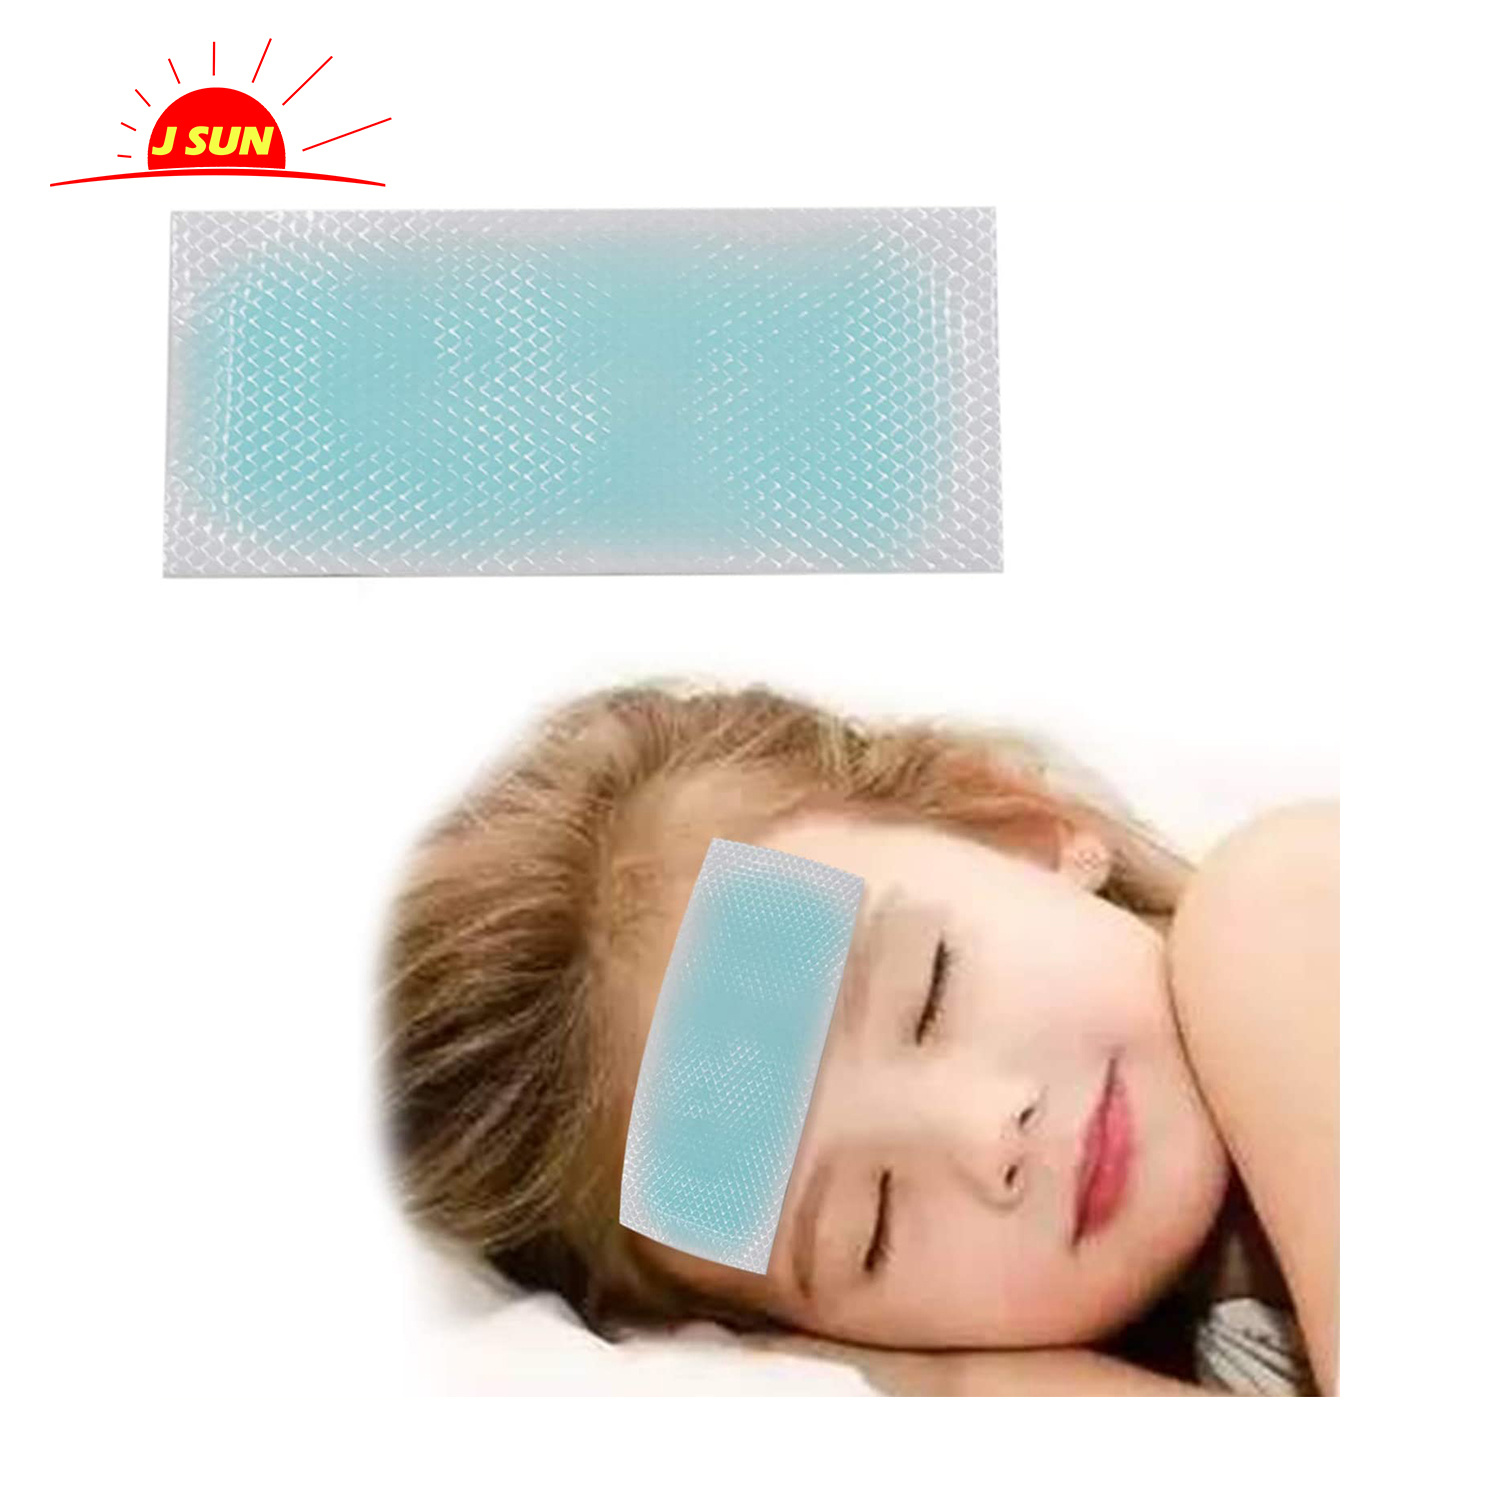 Cooling Relief Fever Reducer gel patch